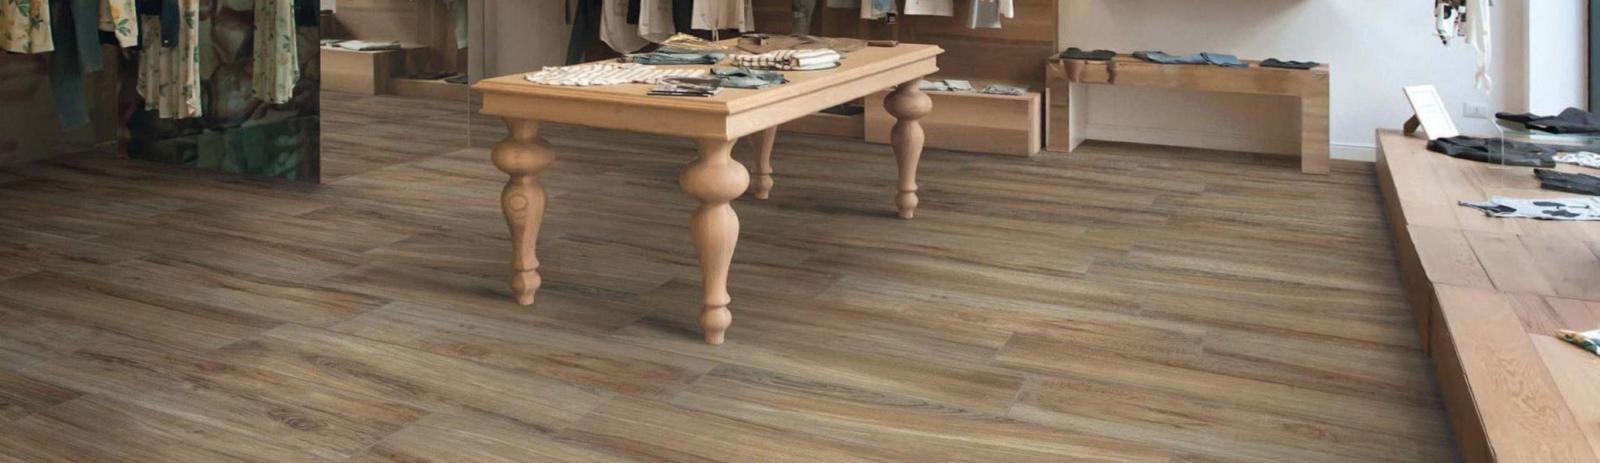 banner-eco-timber-rectified-wood-look-tile-faro-ceramiche-1900x550